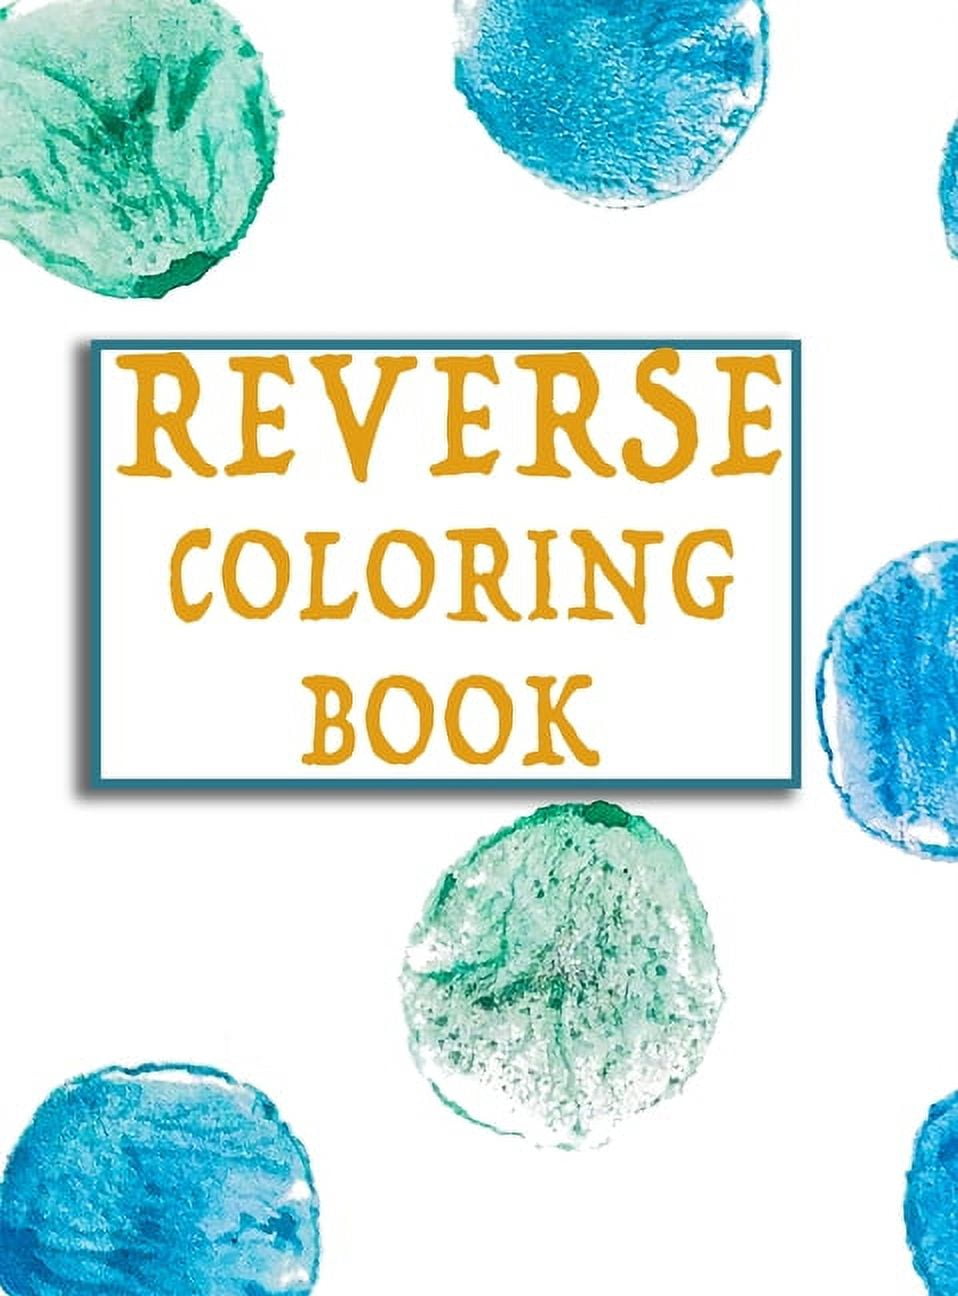 The Beautiful Reverse Coloring Book Vol.1: A reverse coloring book